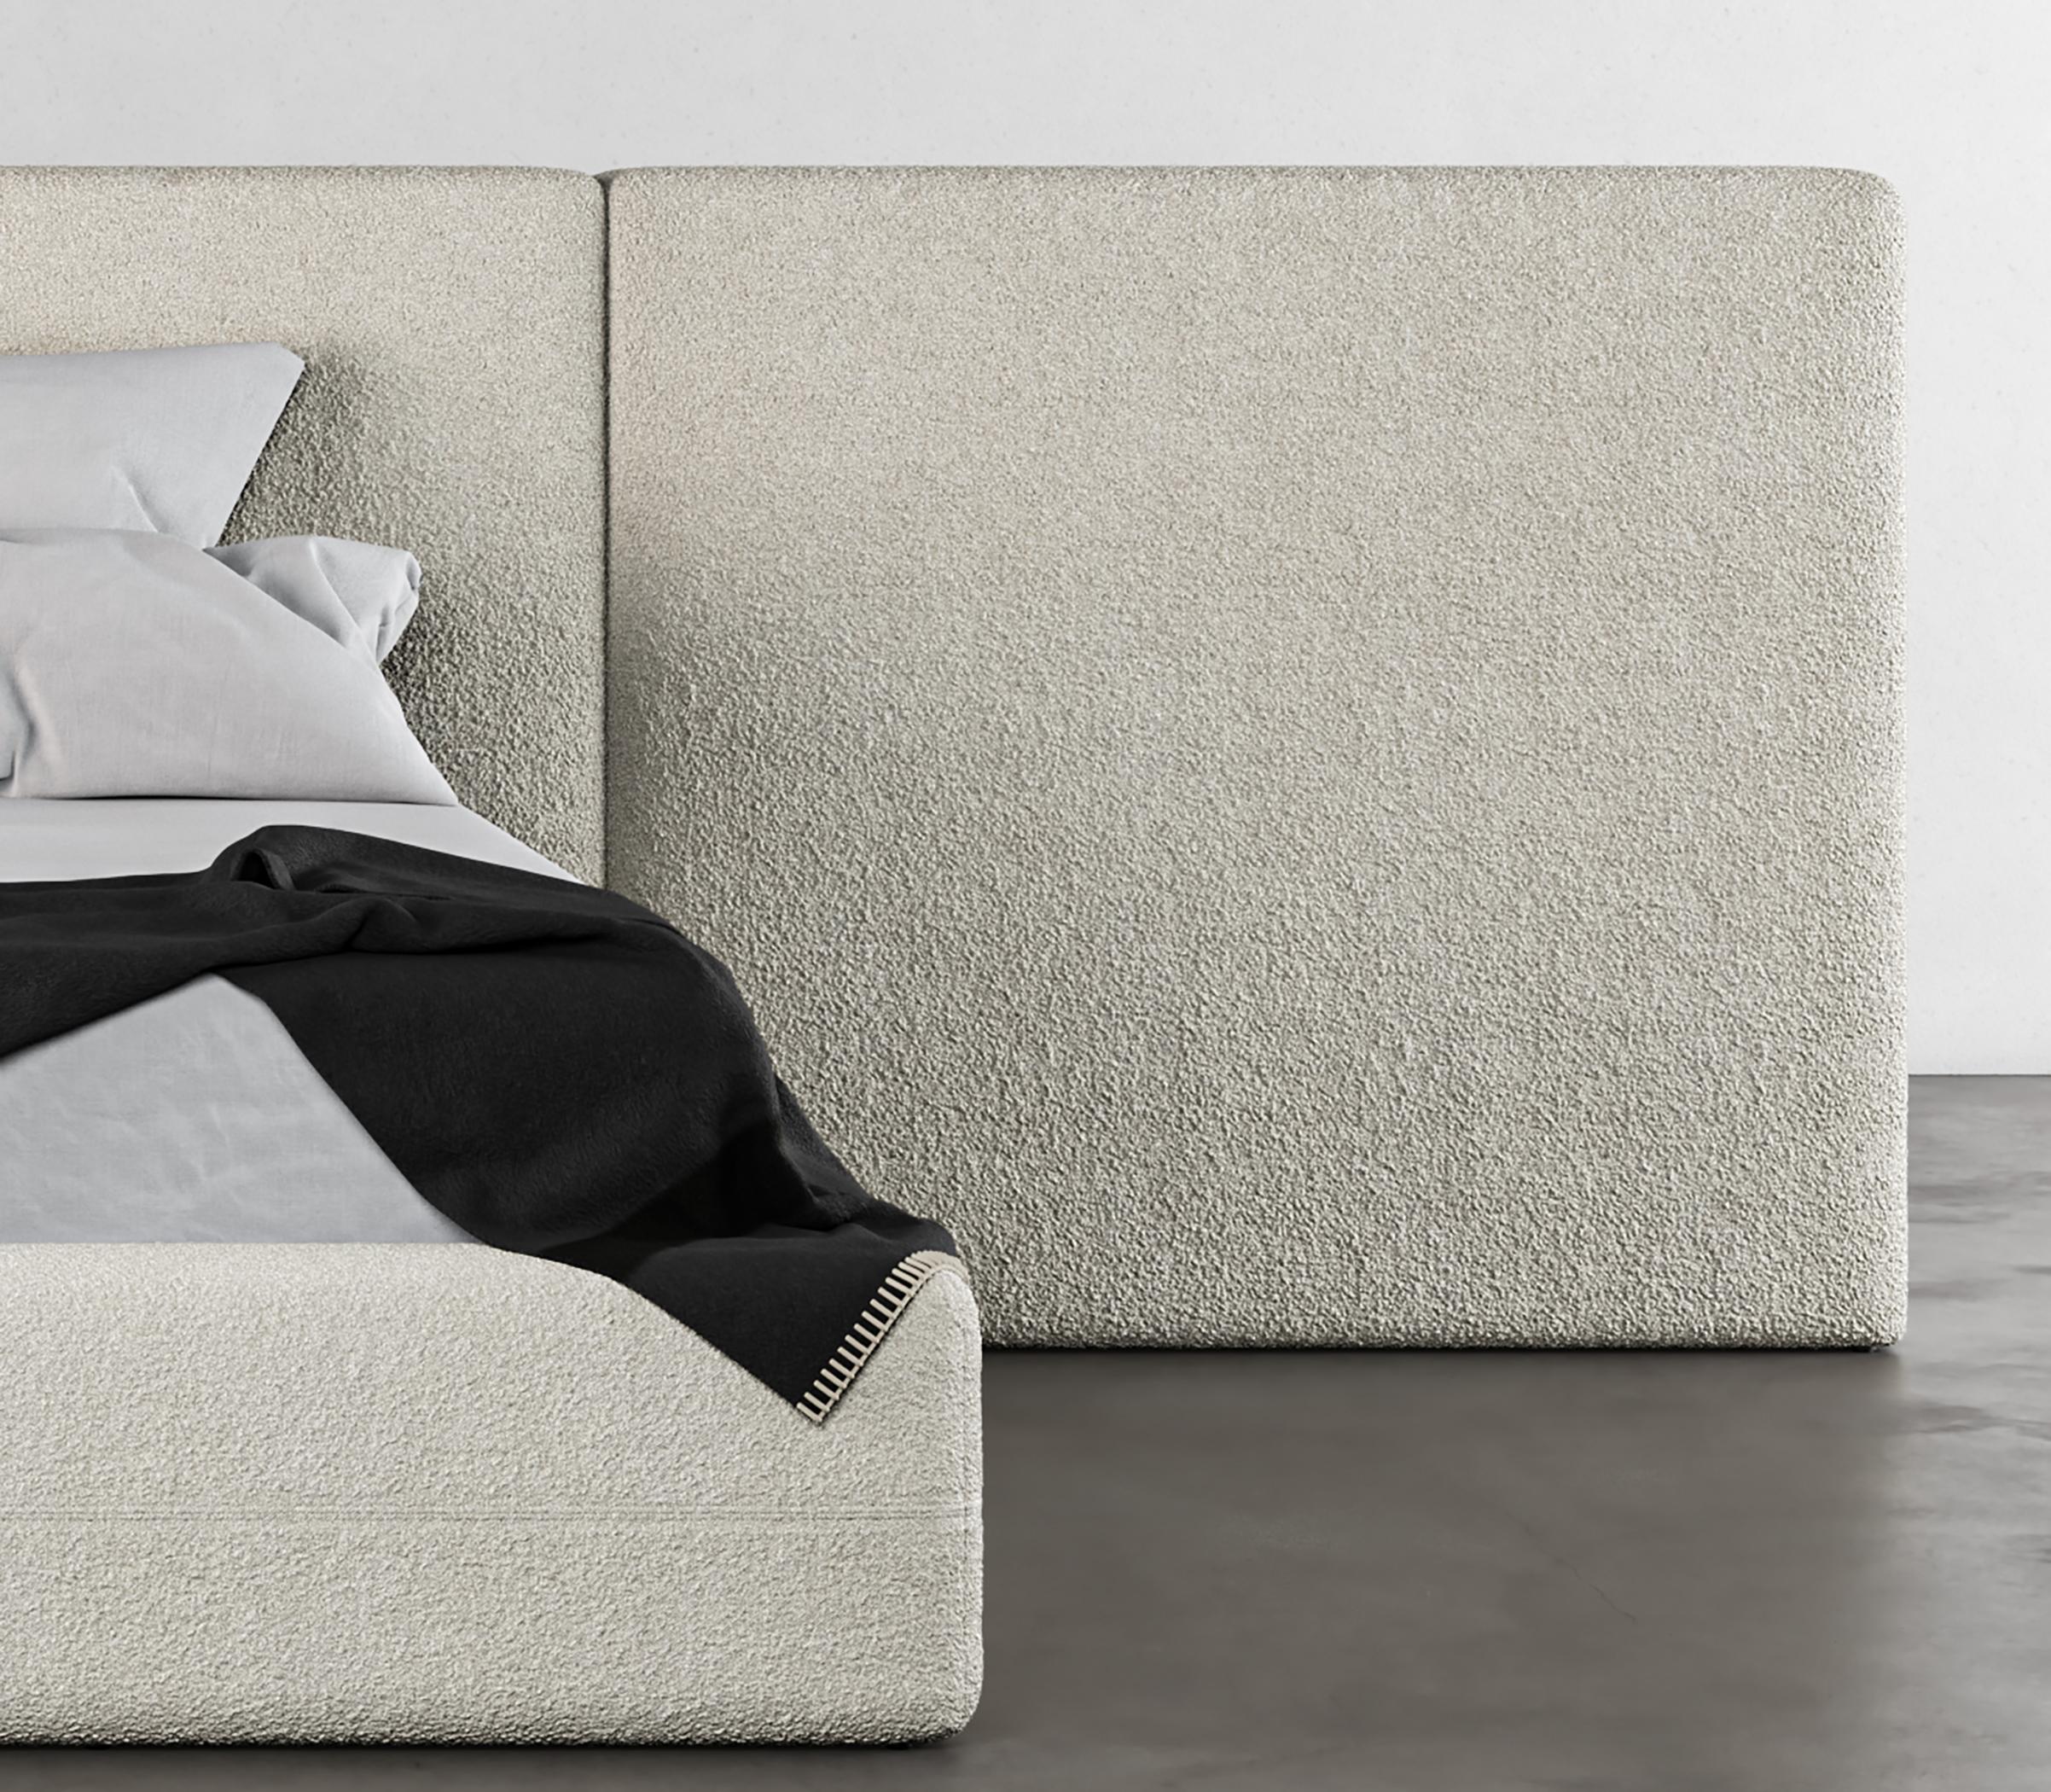 Drift Bed - Modern Design in Soft White Boucle In New Condition For Sale In Laguna Niguel, CA